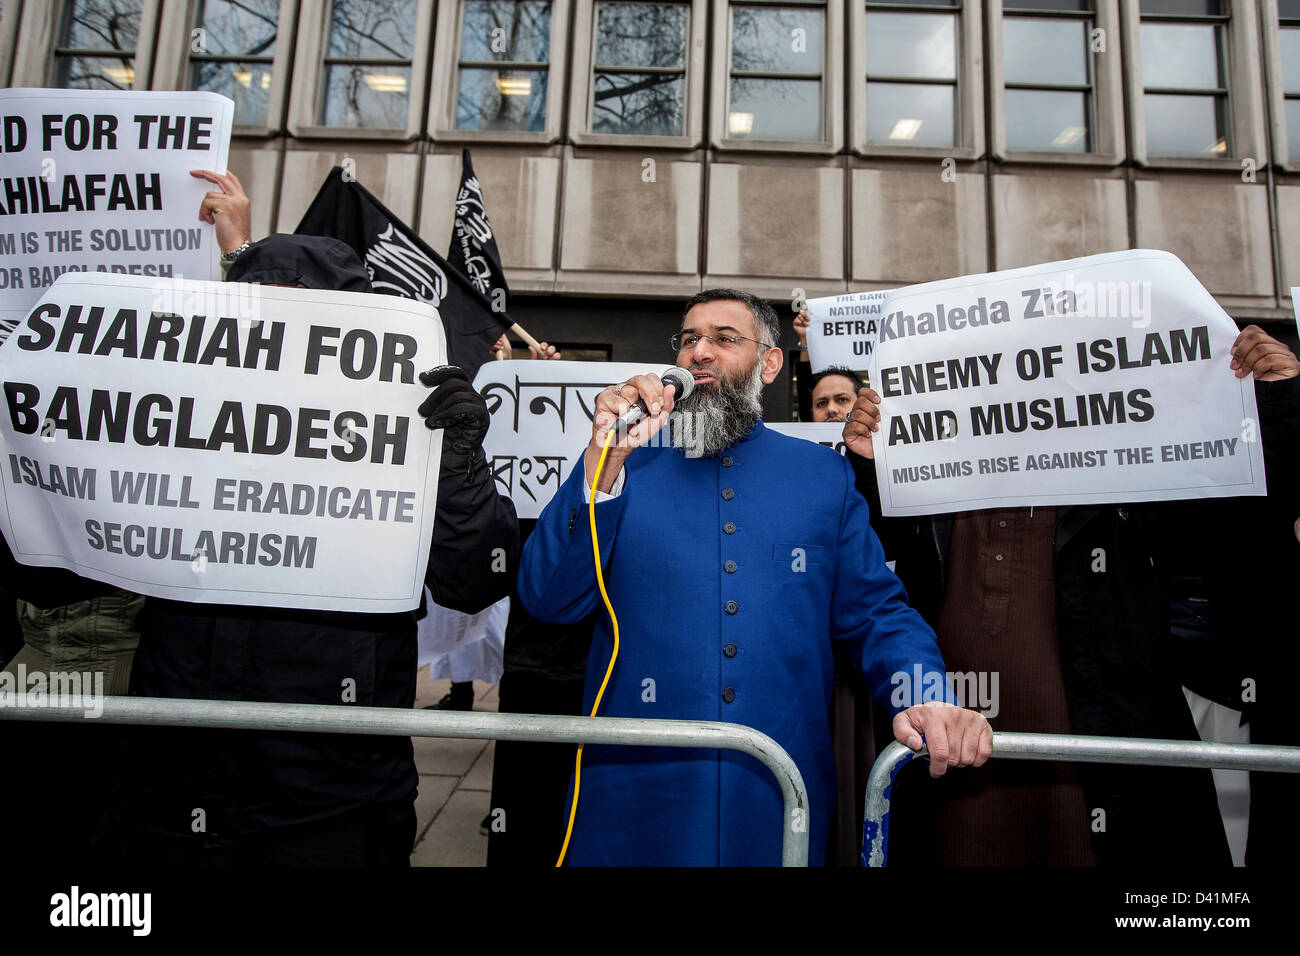 London, UK. 1st March 2013. Extremist Islamic protest group led by cleric Anjem Choudry demonstrate against Bangladesh outside the Bangladeshi embassy. They are angry at the call for arrests of muslim leaders who have sided with Pakistan, and the oppression of muslims by the government. 01/03/2013 , London, United Kingdom  Credit:  Mario Mitsis / Alamy Live News Stock Photo